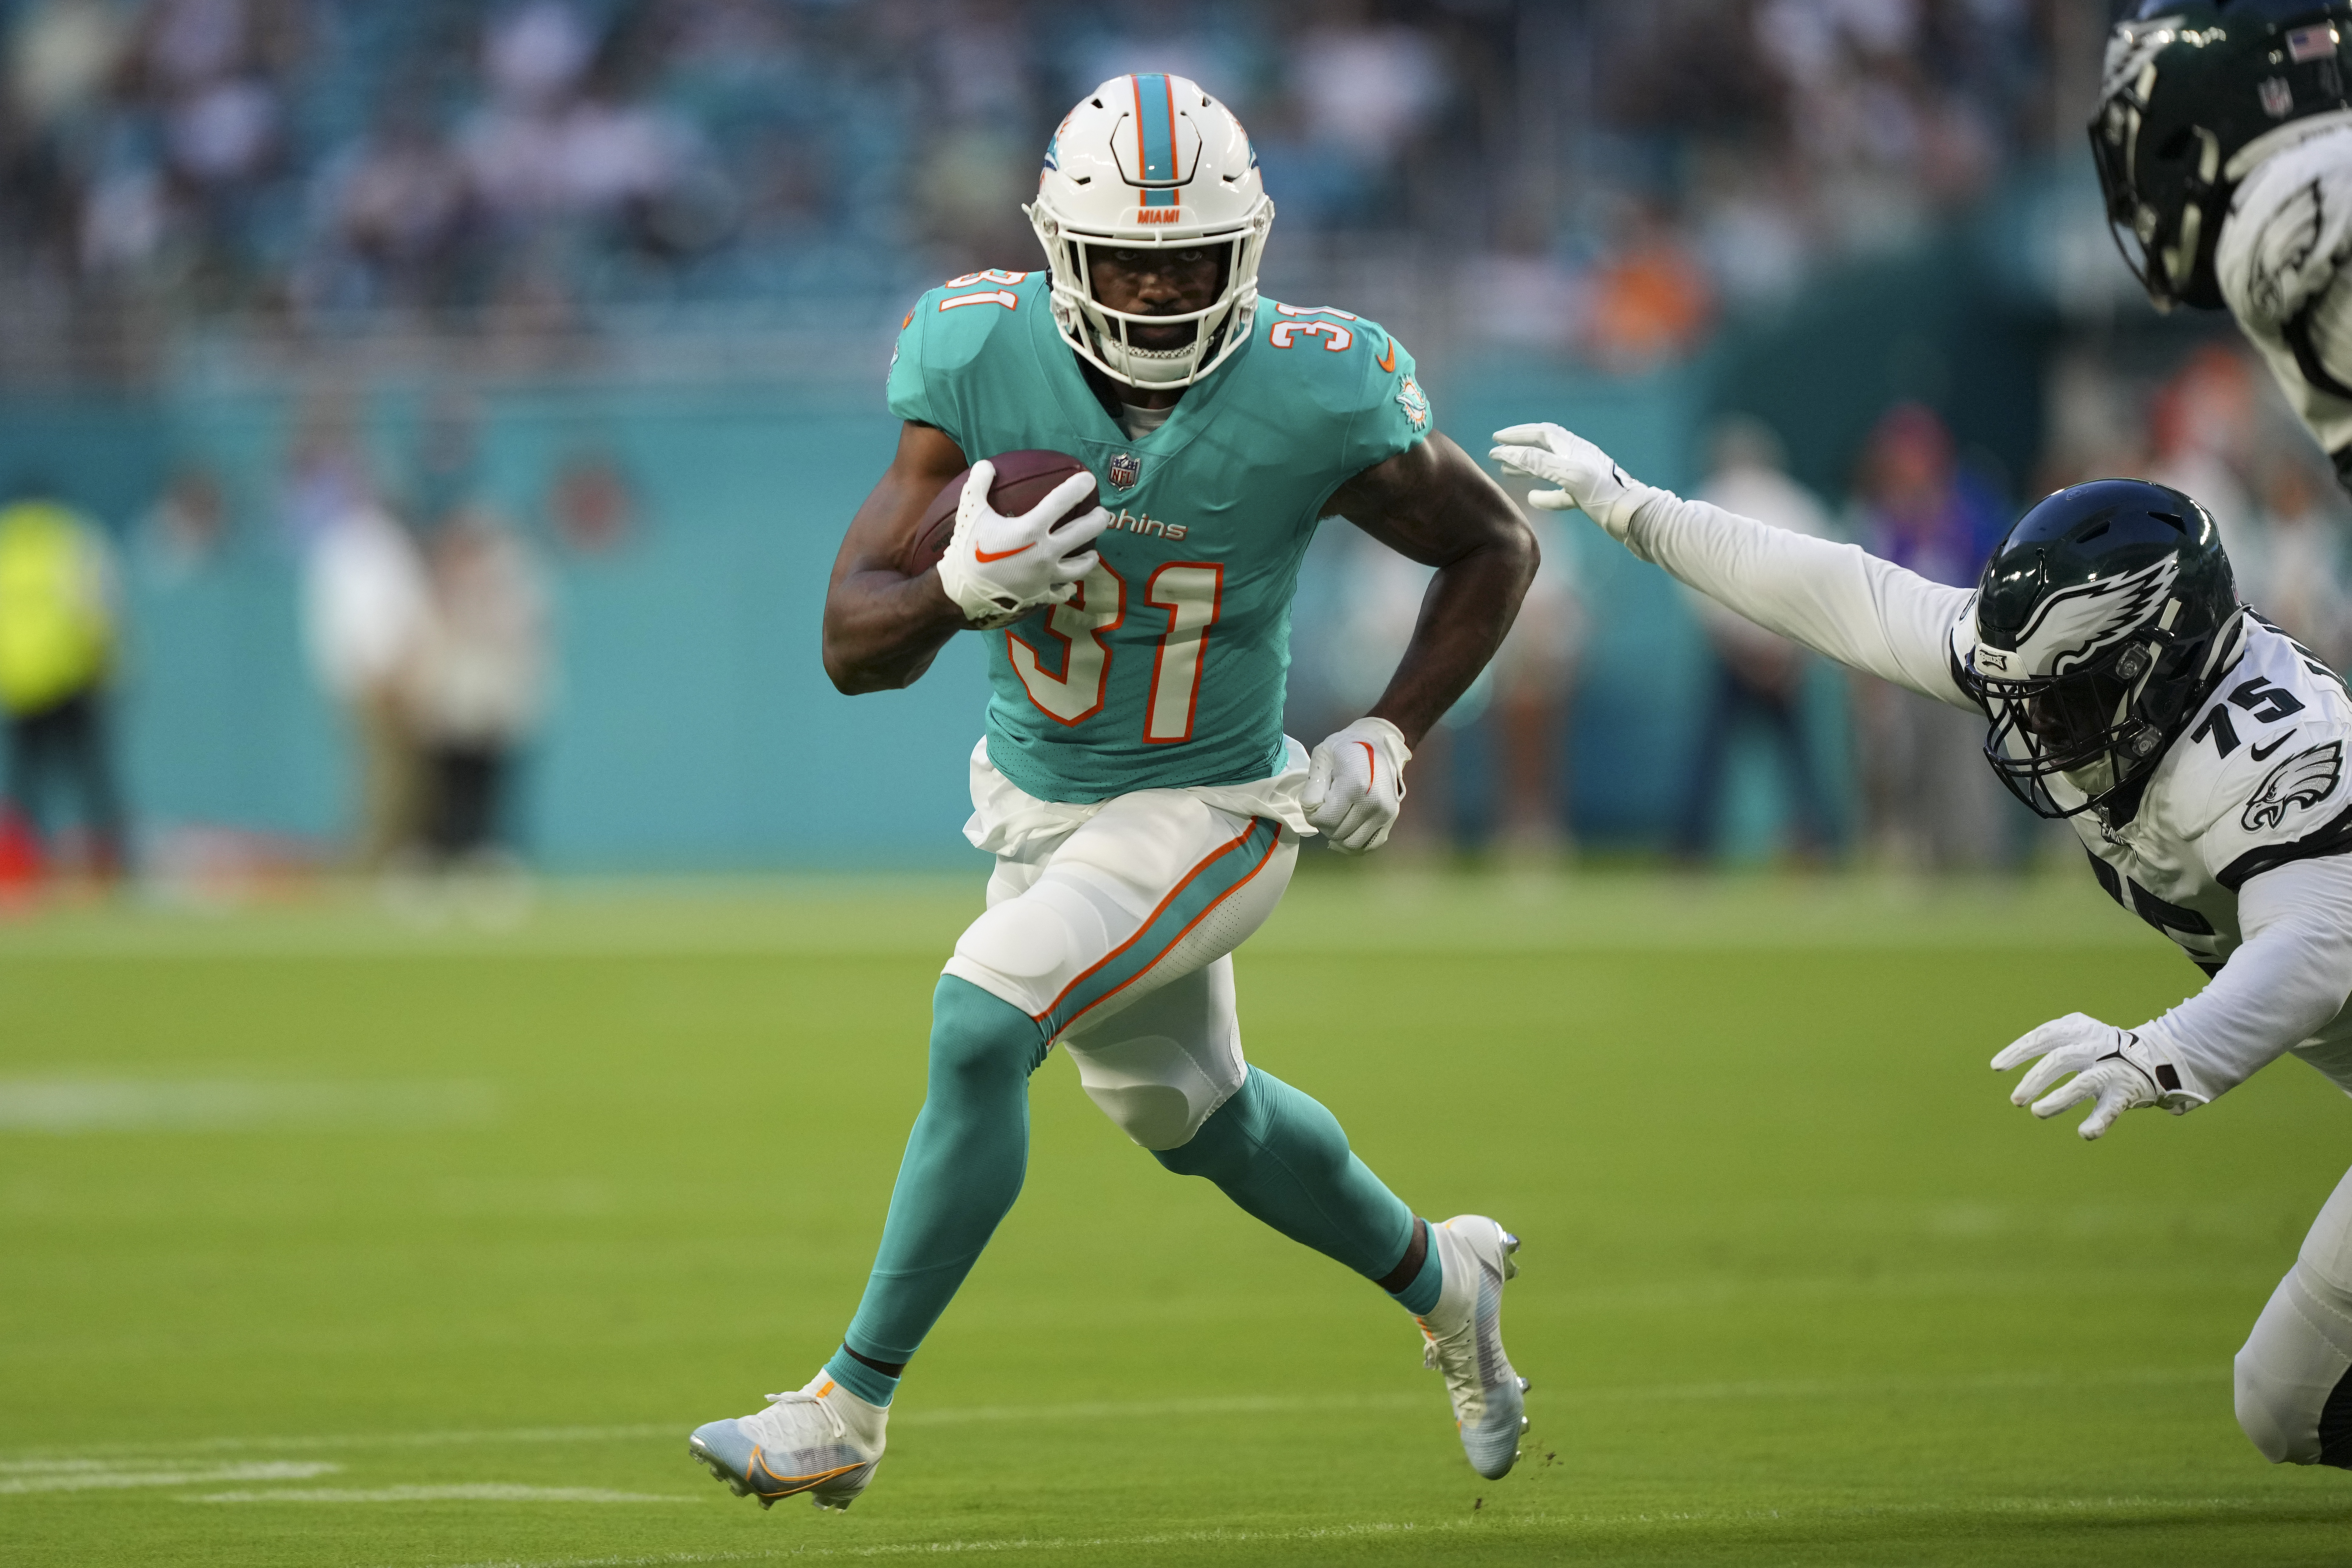 Raheem Mostert #31 of the Miami Dolphins rushes the football during the first quarter of the preseason game against the Philadelphia Eagles at Hard Rock Stadium on August 27, 2022 in Miami Gardens, Florida.